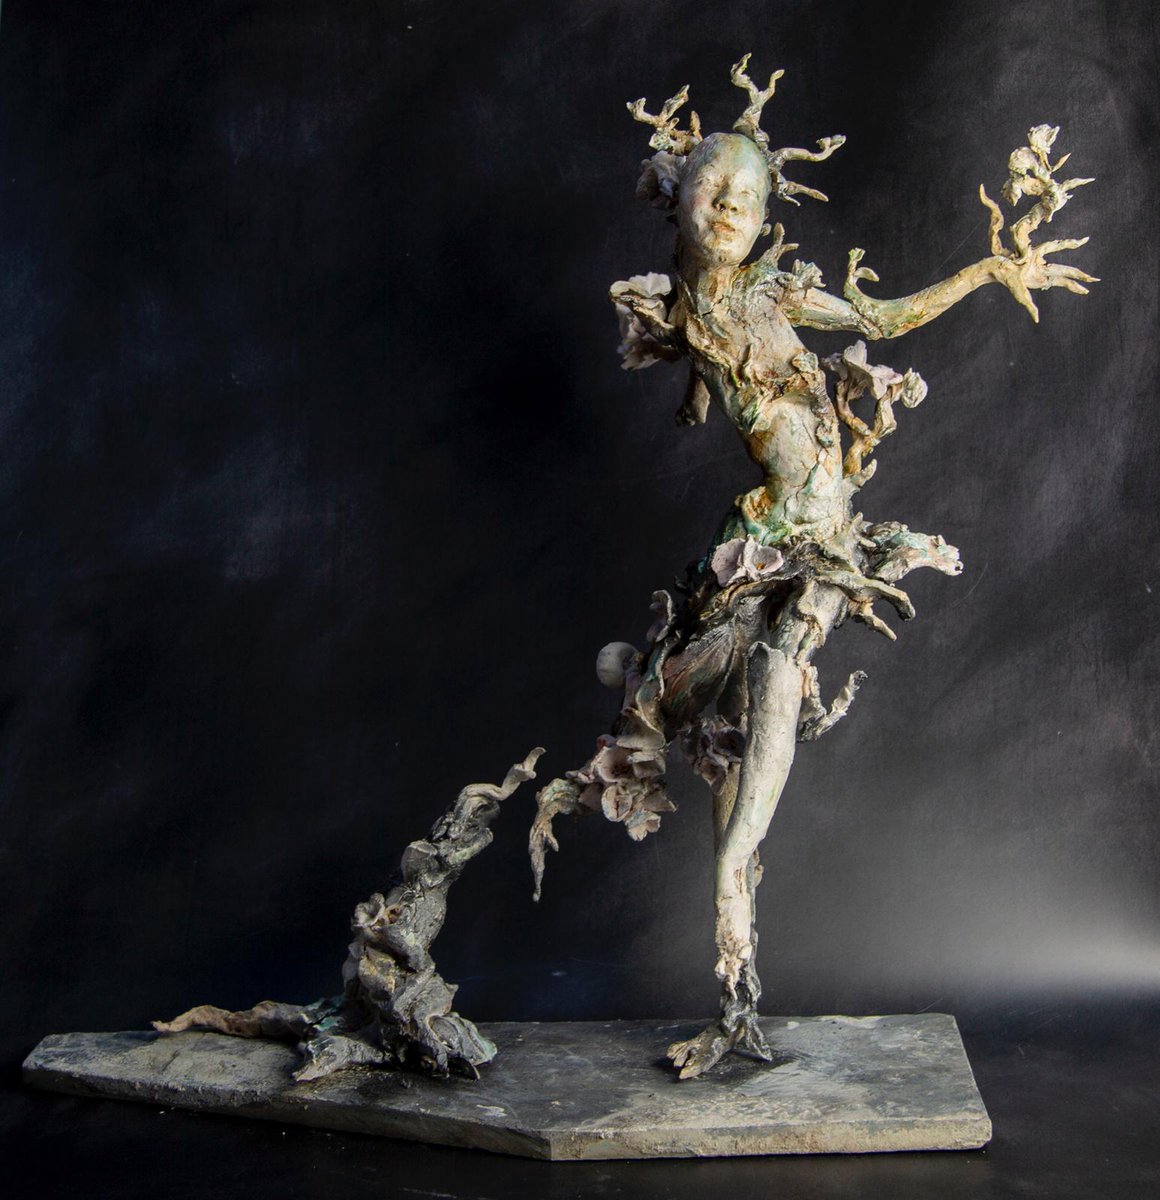 Sold! 
All That Remained Of Daphne Was Her Shining Loveliness'
solo exhibition 
#Metamorphoses  
#blackmoregallery 
 19th November- 23rd December
Thank you so much @blackmoregalery & @CollectArtLymm #porcelain #ceramic @ValentineClays
@potclays